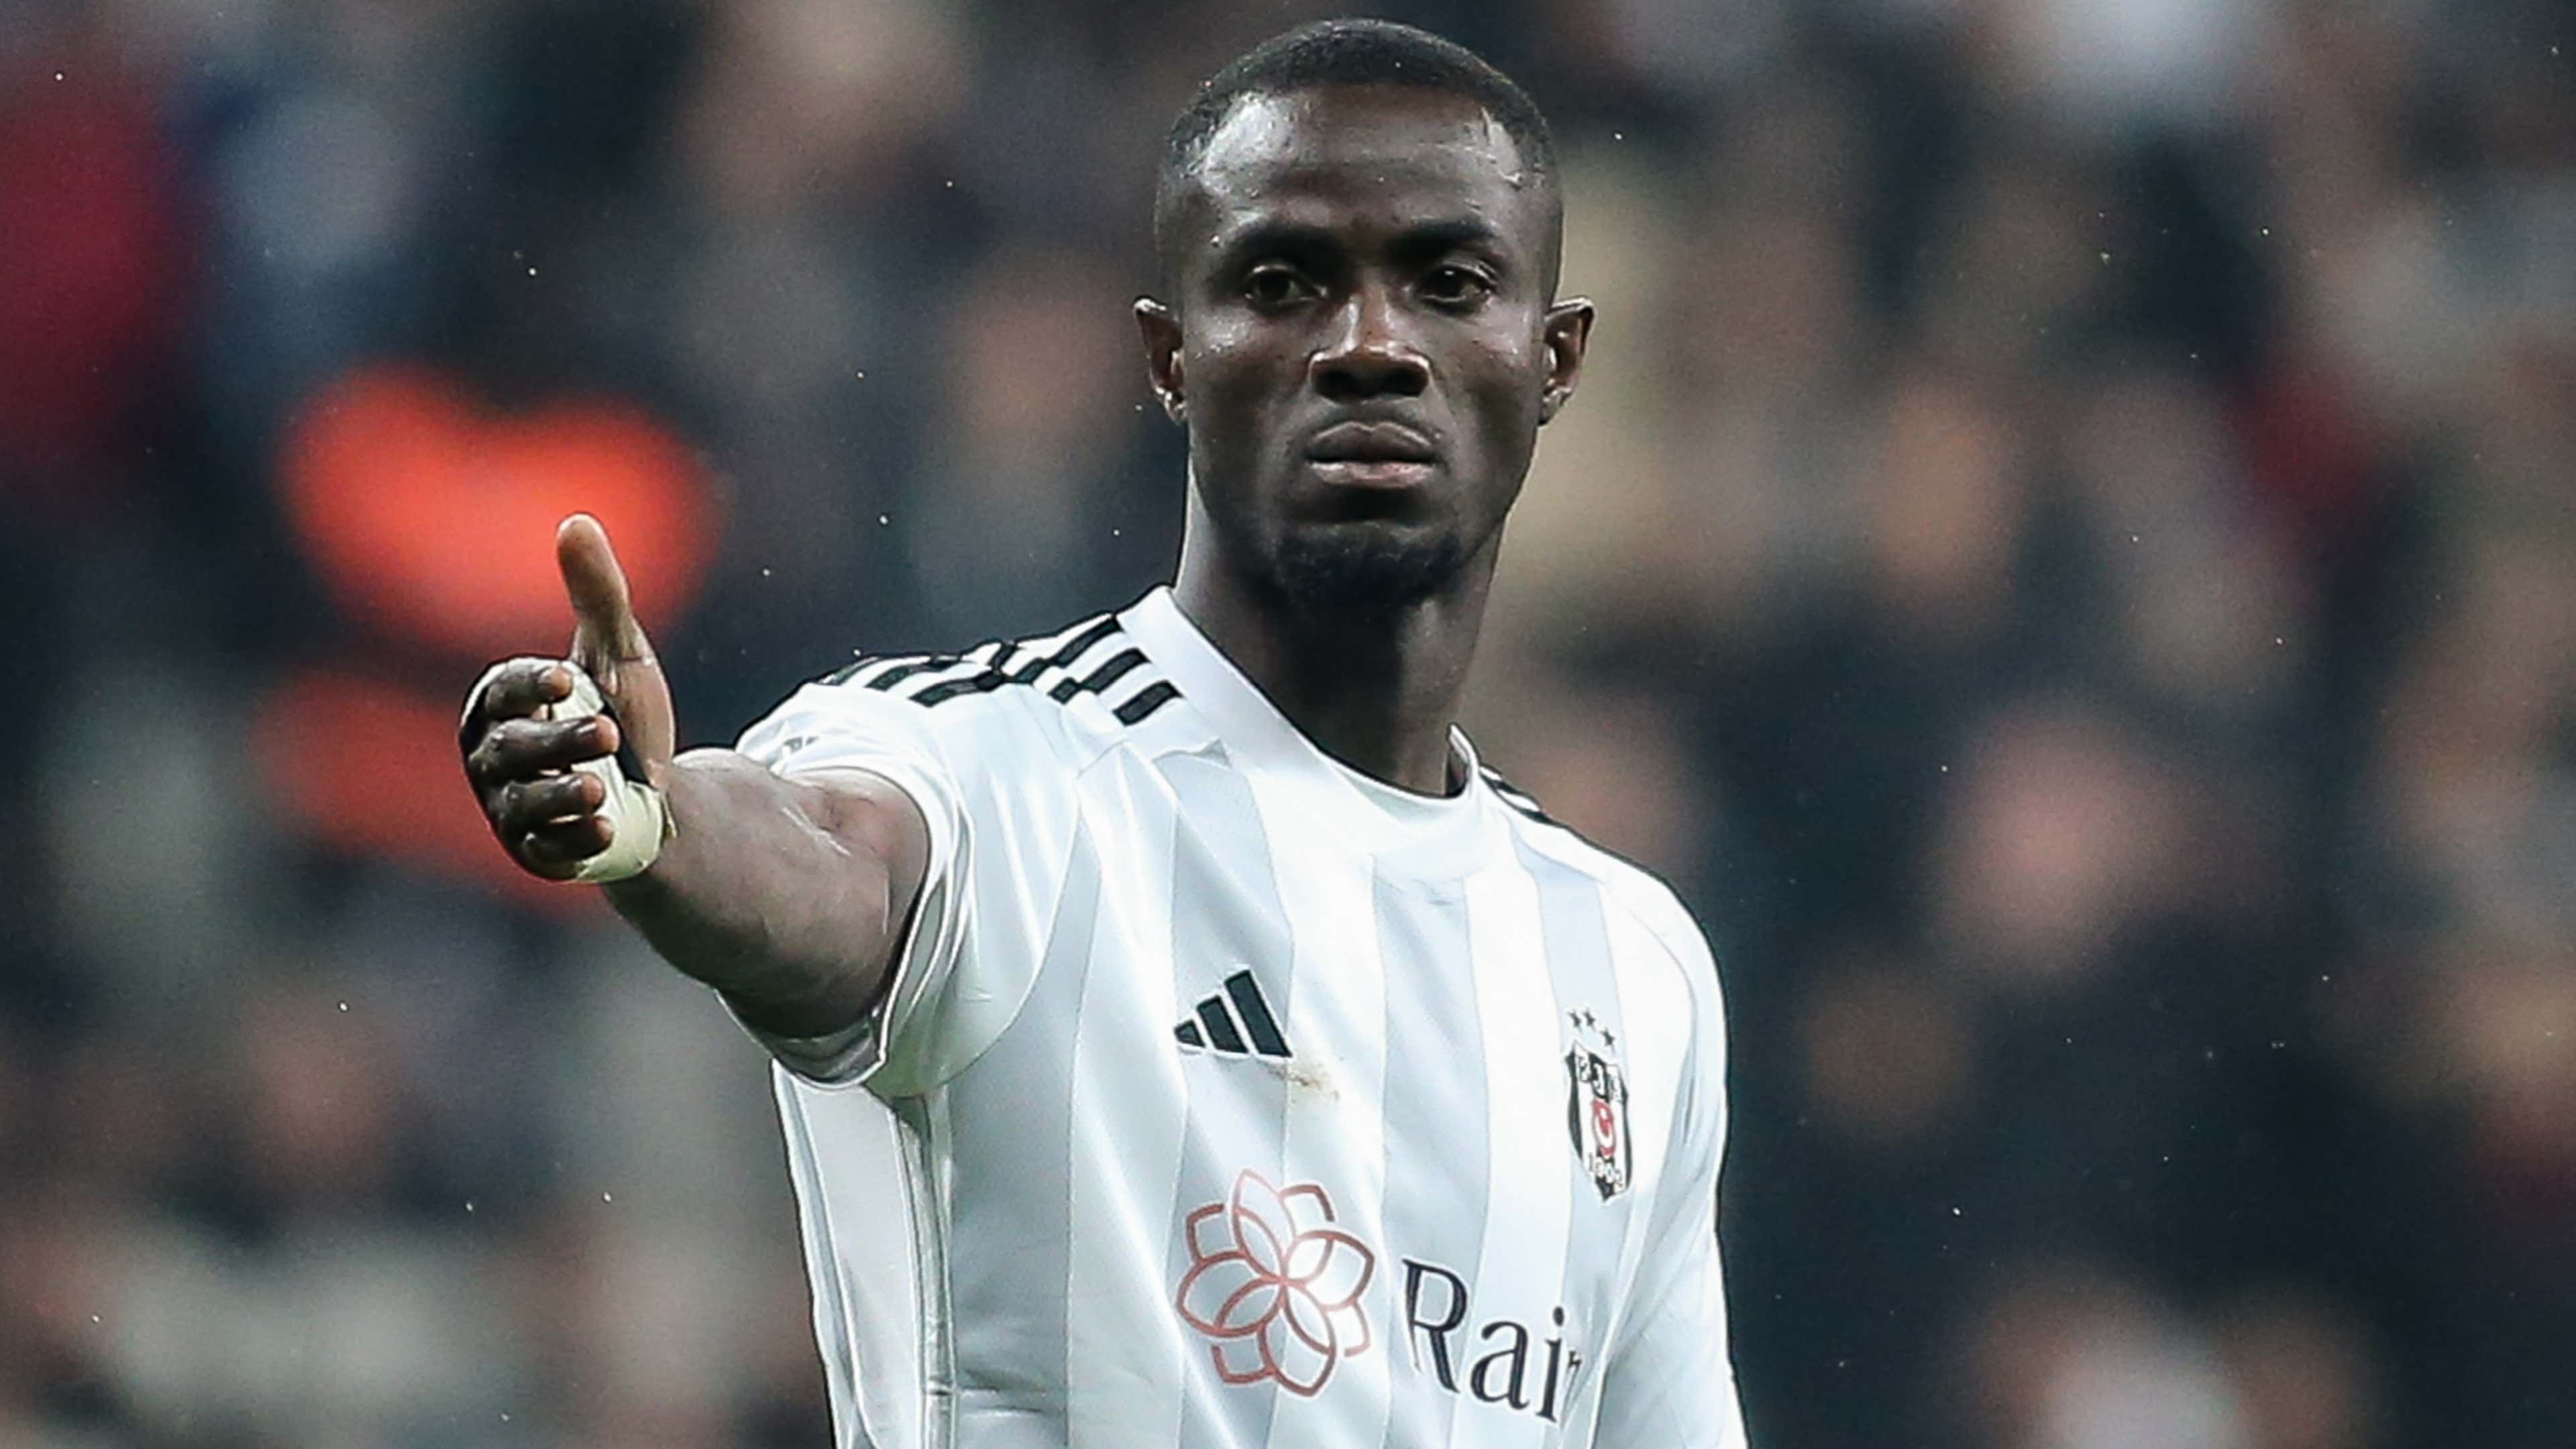 Man Utd flop Eric Bailly exiled at Besiktas within 98 days of